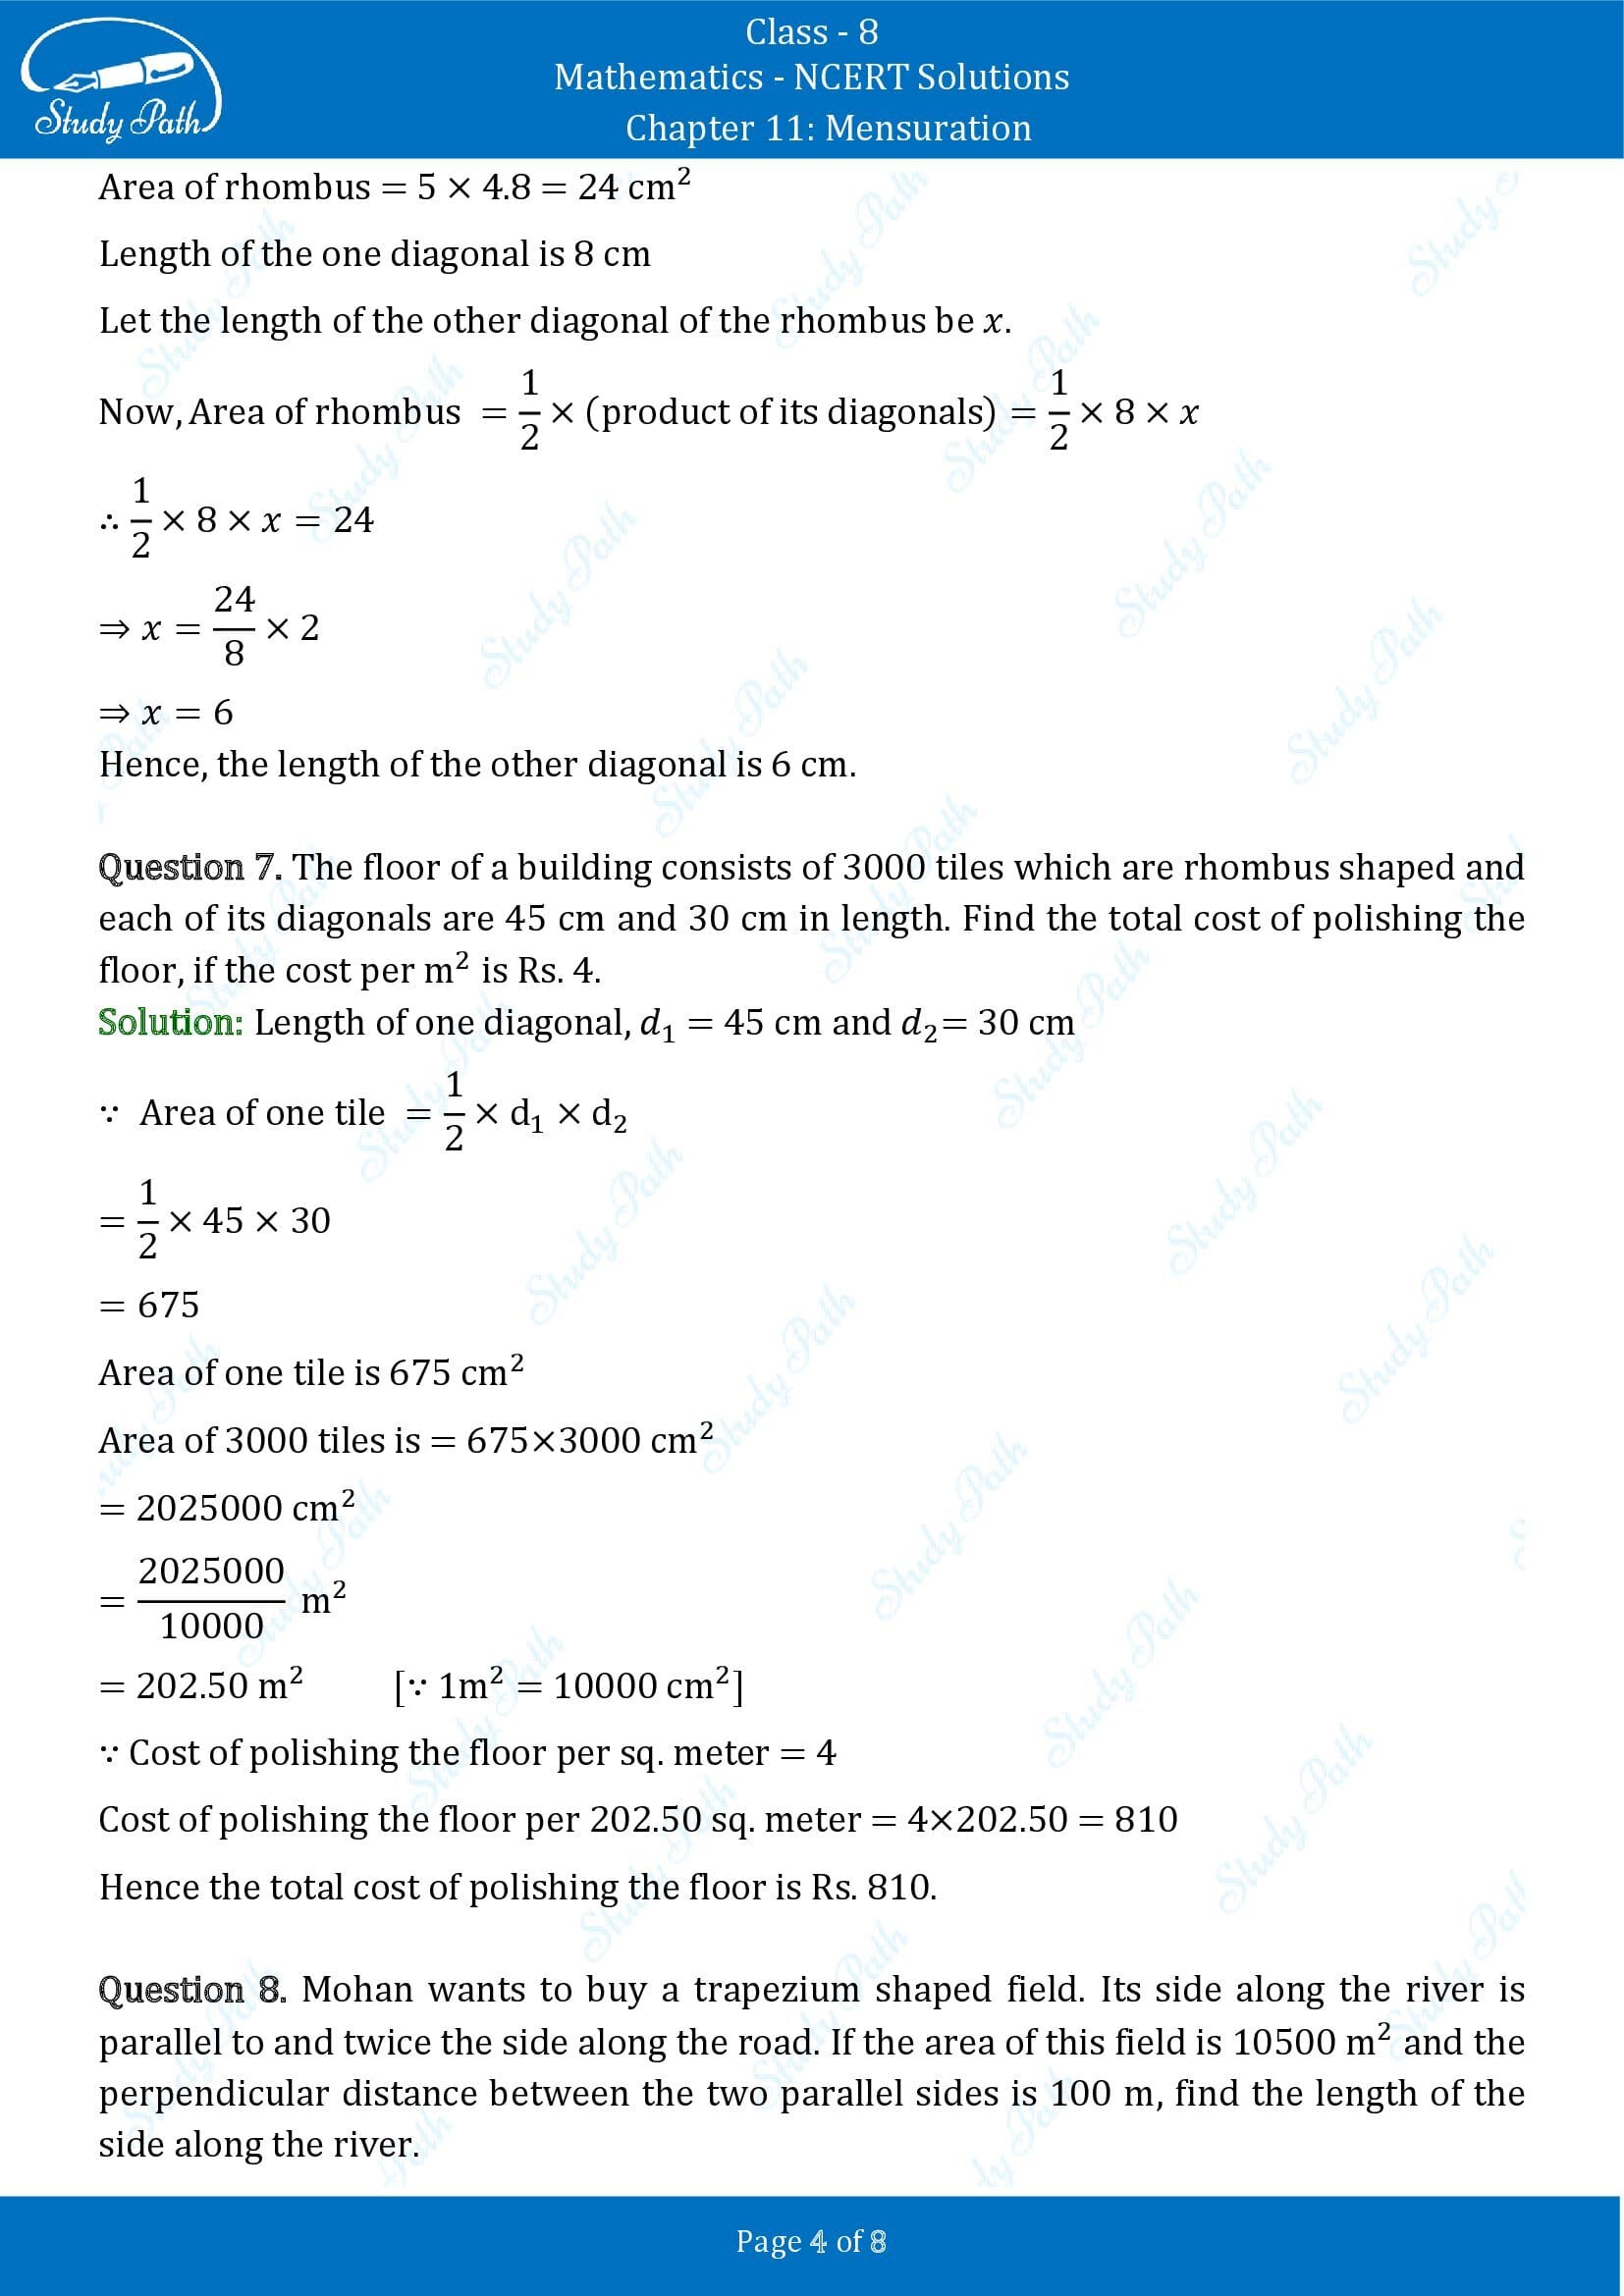 NCERT Solutions for Class 8 Maths Chapter 11 Mensuration Exercise 11.2 00004